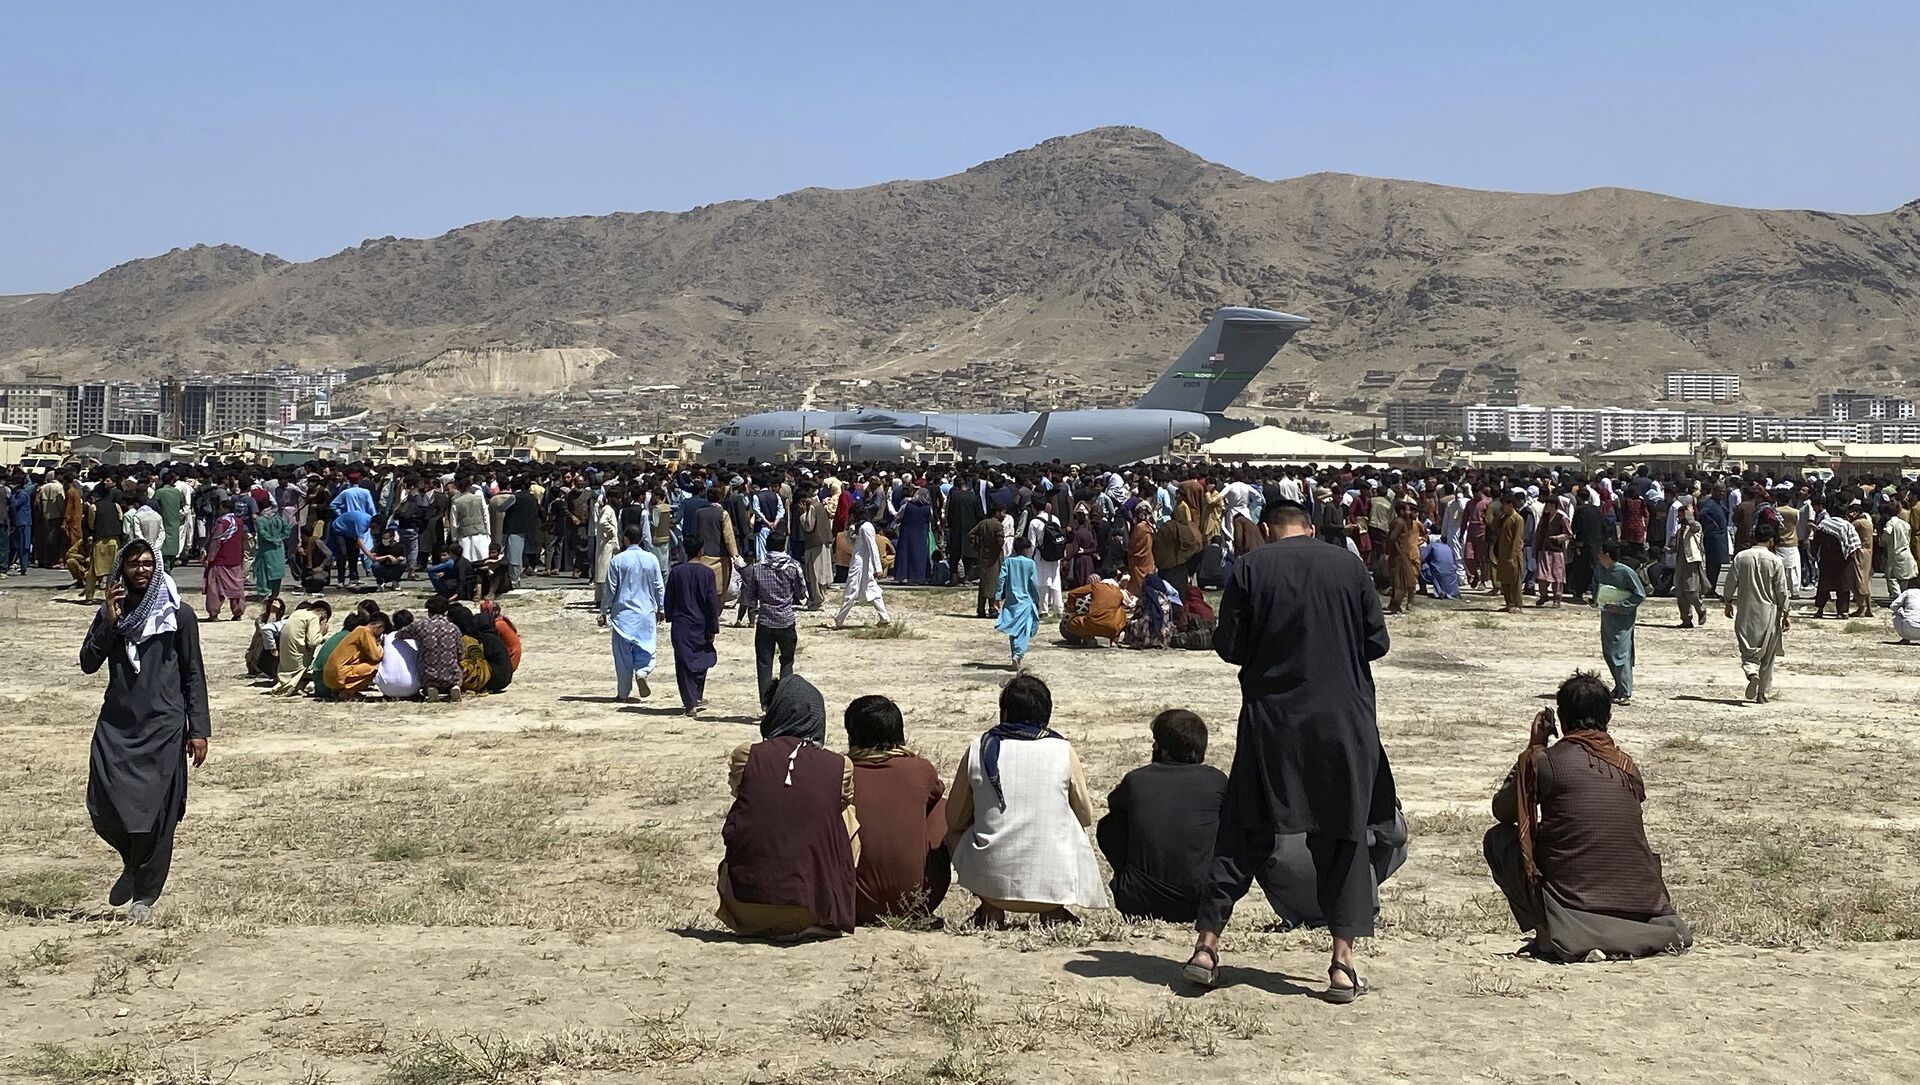  Hundreds of people gather near a U.S. Air Force C-17 transport plane at a perimeter at the international airport in Kabul, Afghanistan, Monday, Aug. 16, 2021 - اسپوتنیک افغانستان  , 1920, 17.08.2021